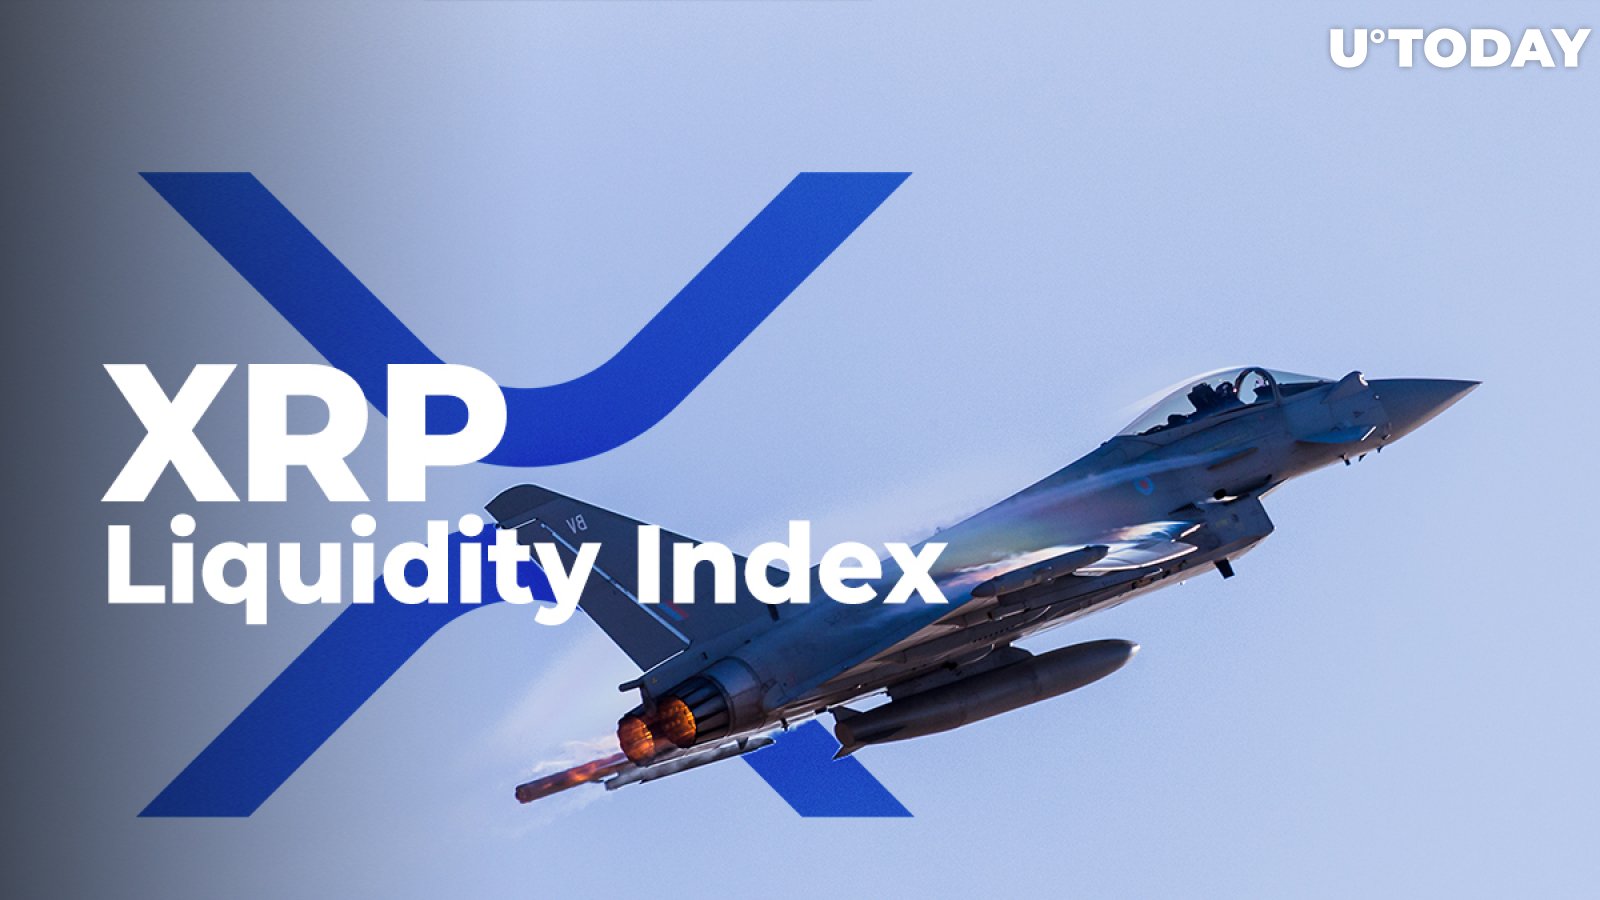 XRP Liquidity Index in AUD Corridor Accelerates, Hitting New All-Time High